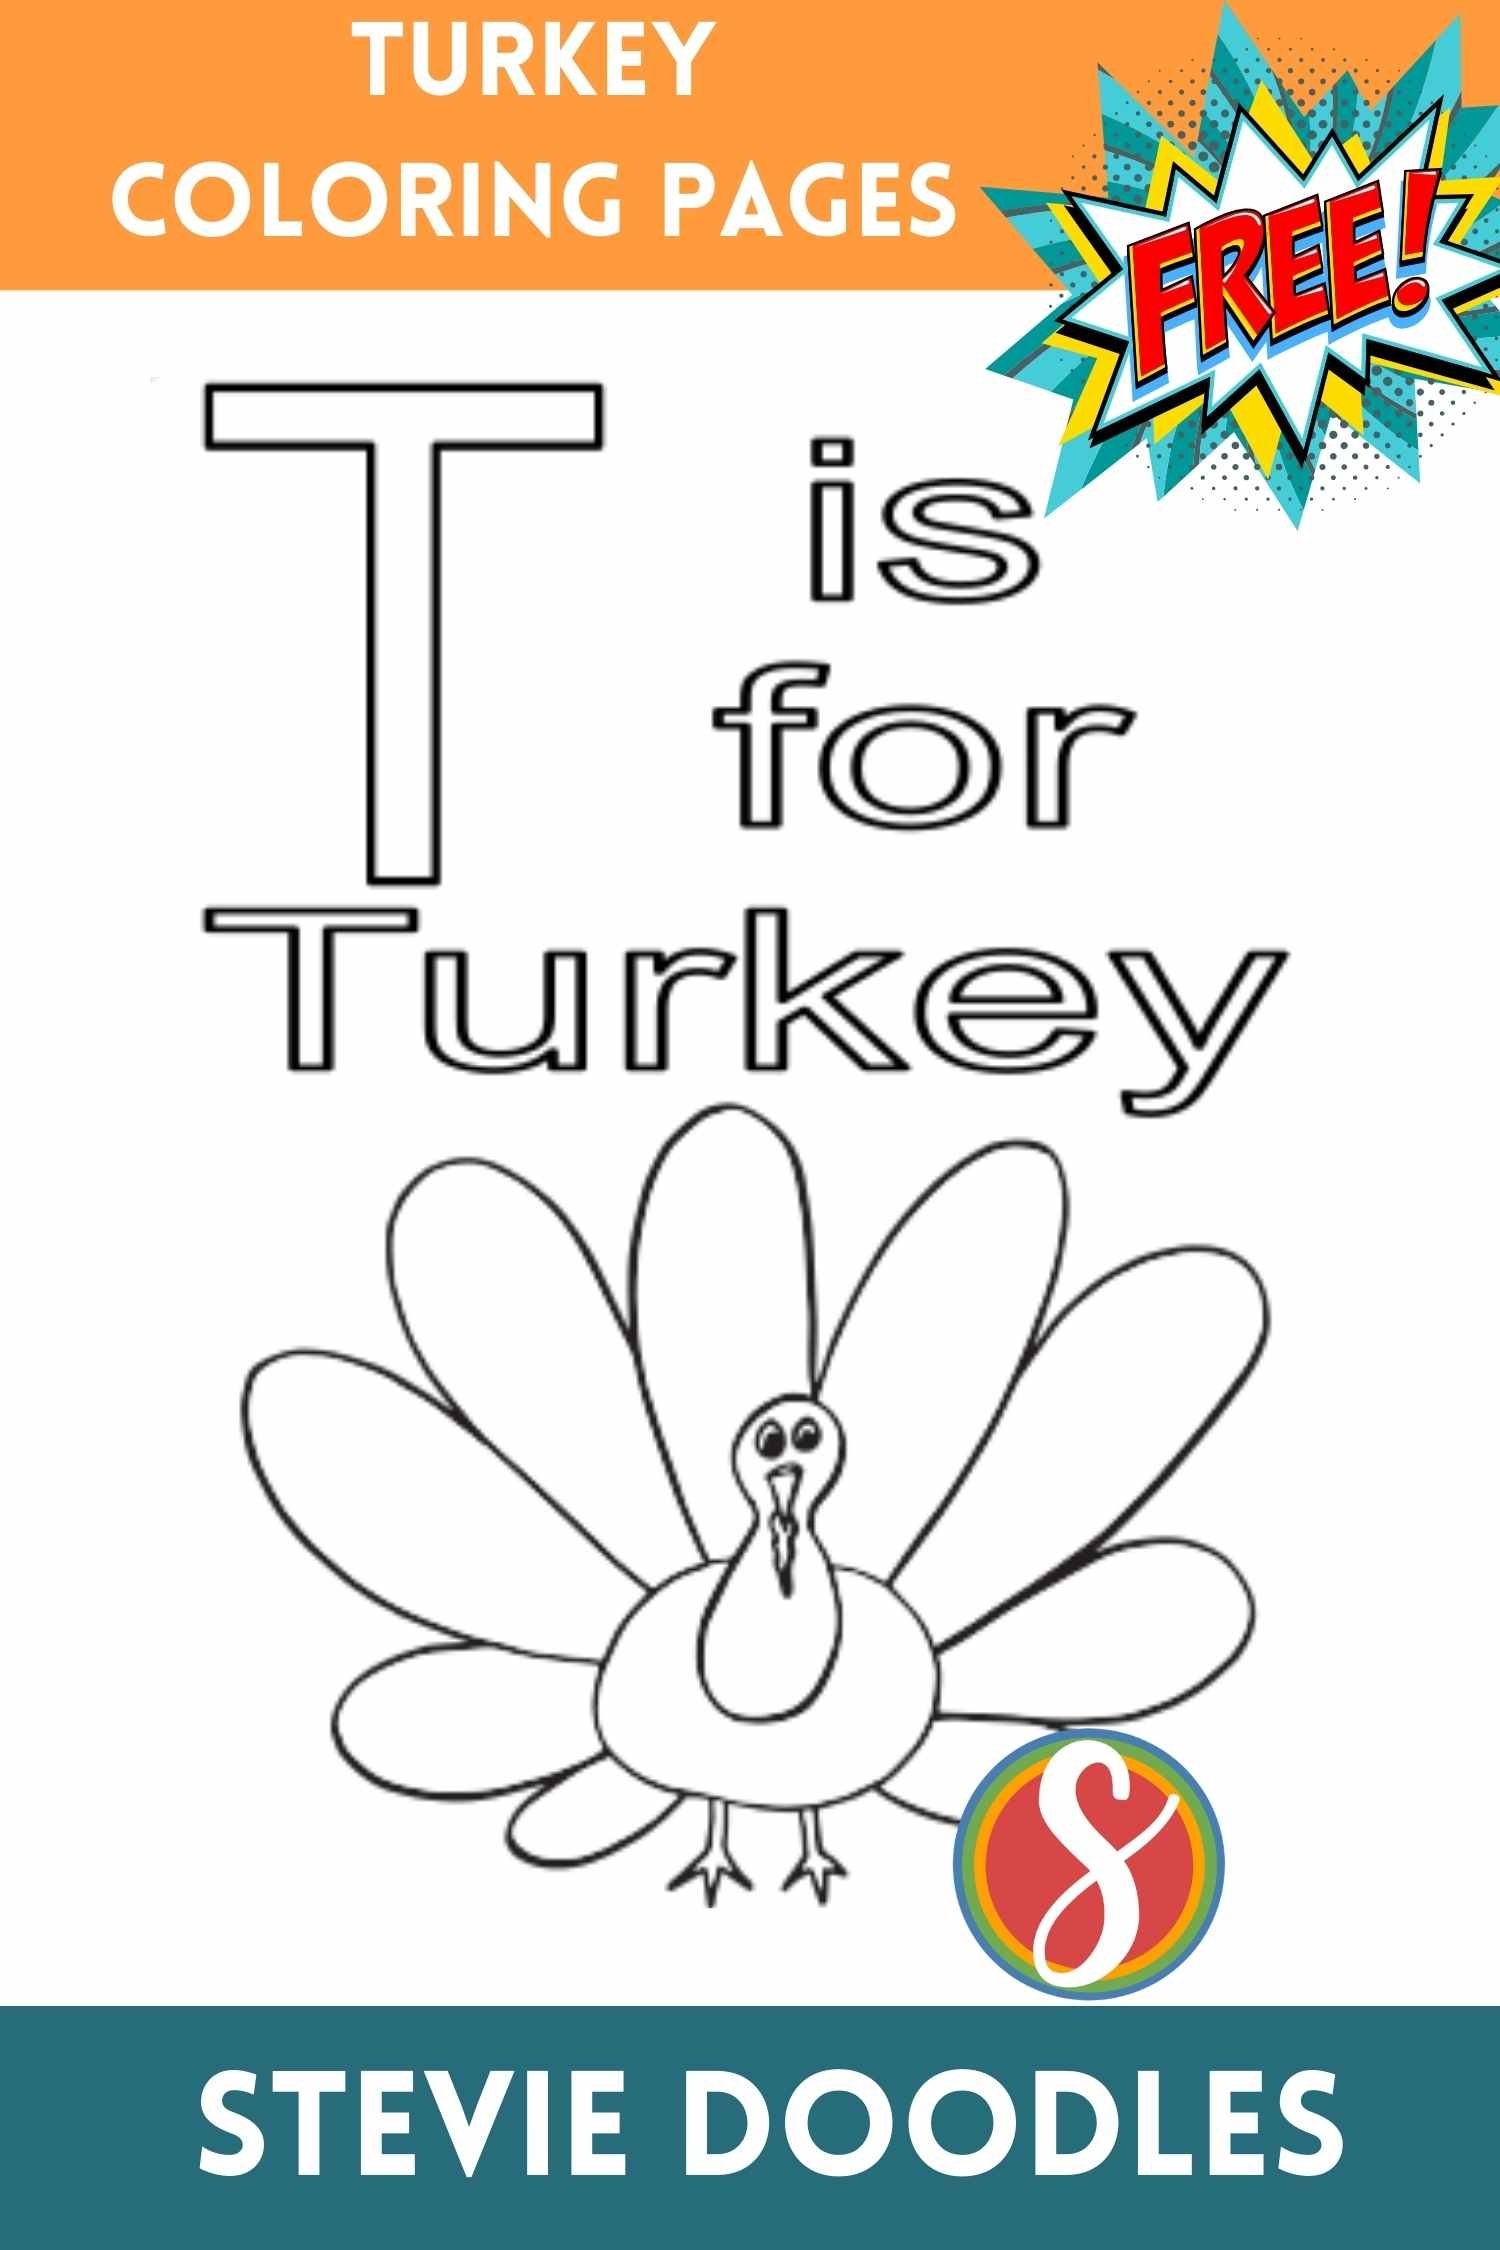 colorable text "I love turkey" above a simple colorable turkey